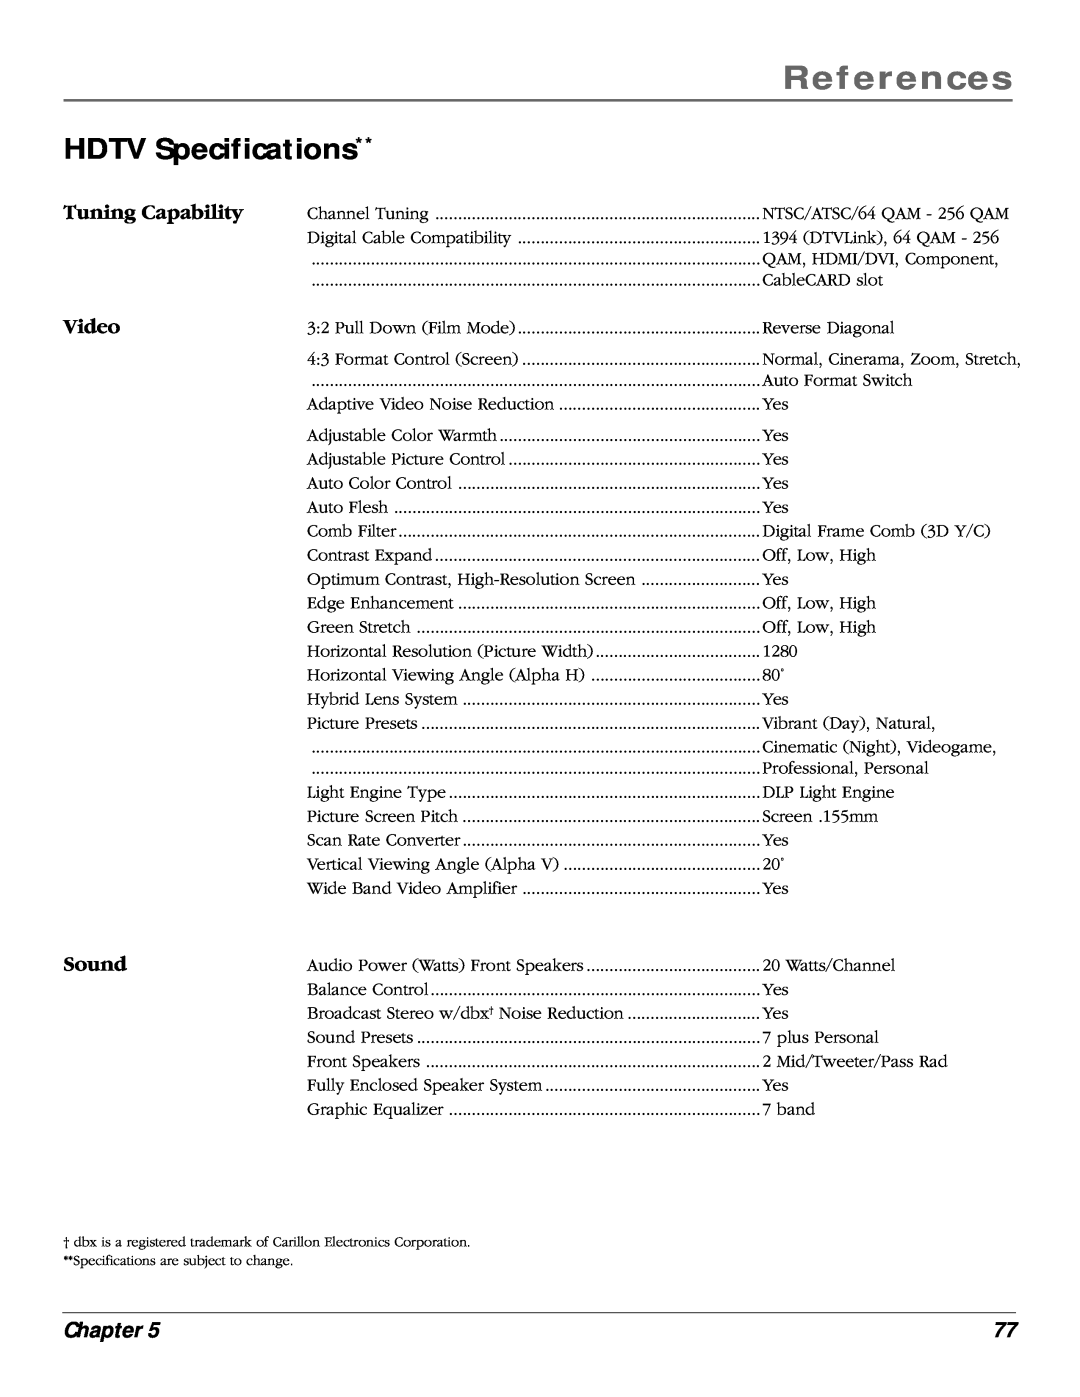 RCA scenium manual Tuning Capability Video Sound, References, HDTV Specifications, Chapter 